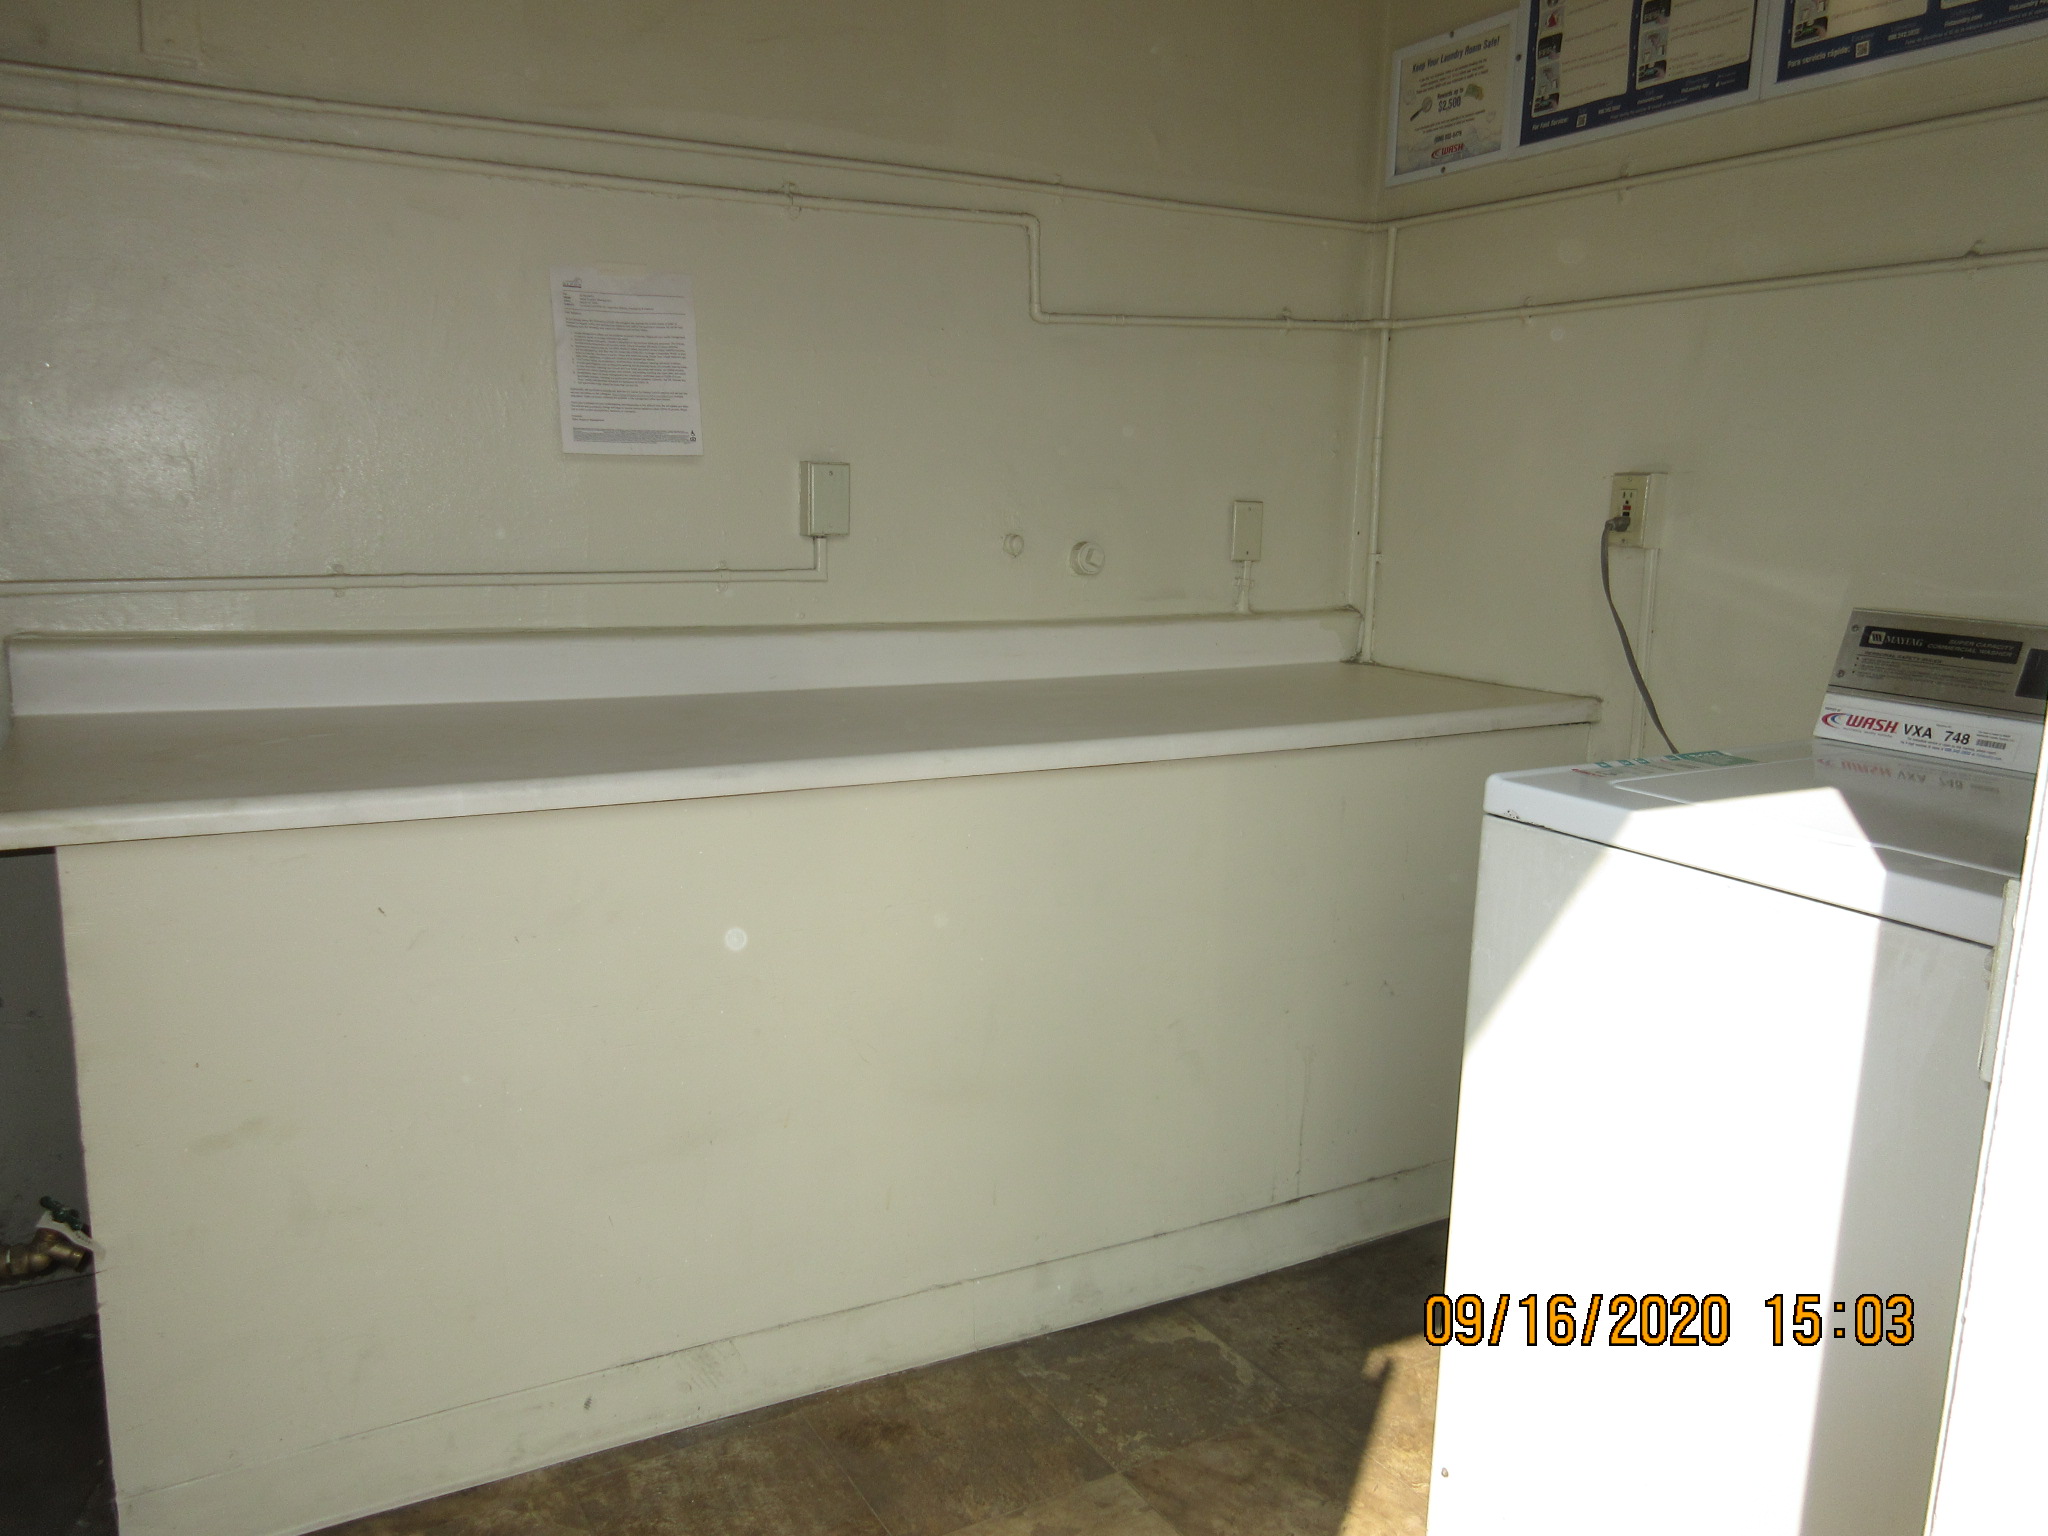 View of a laundry room.